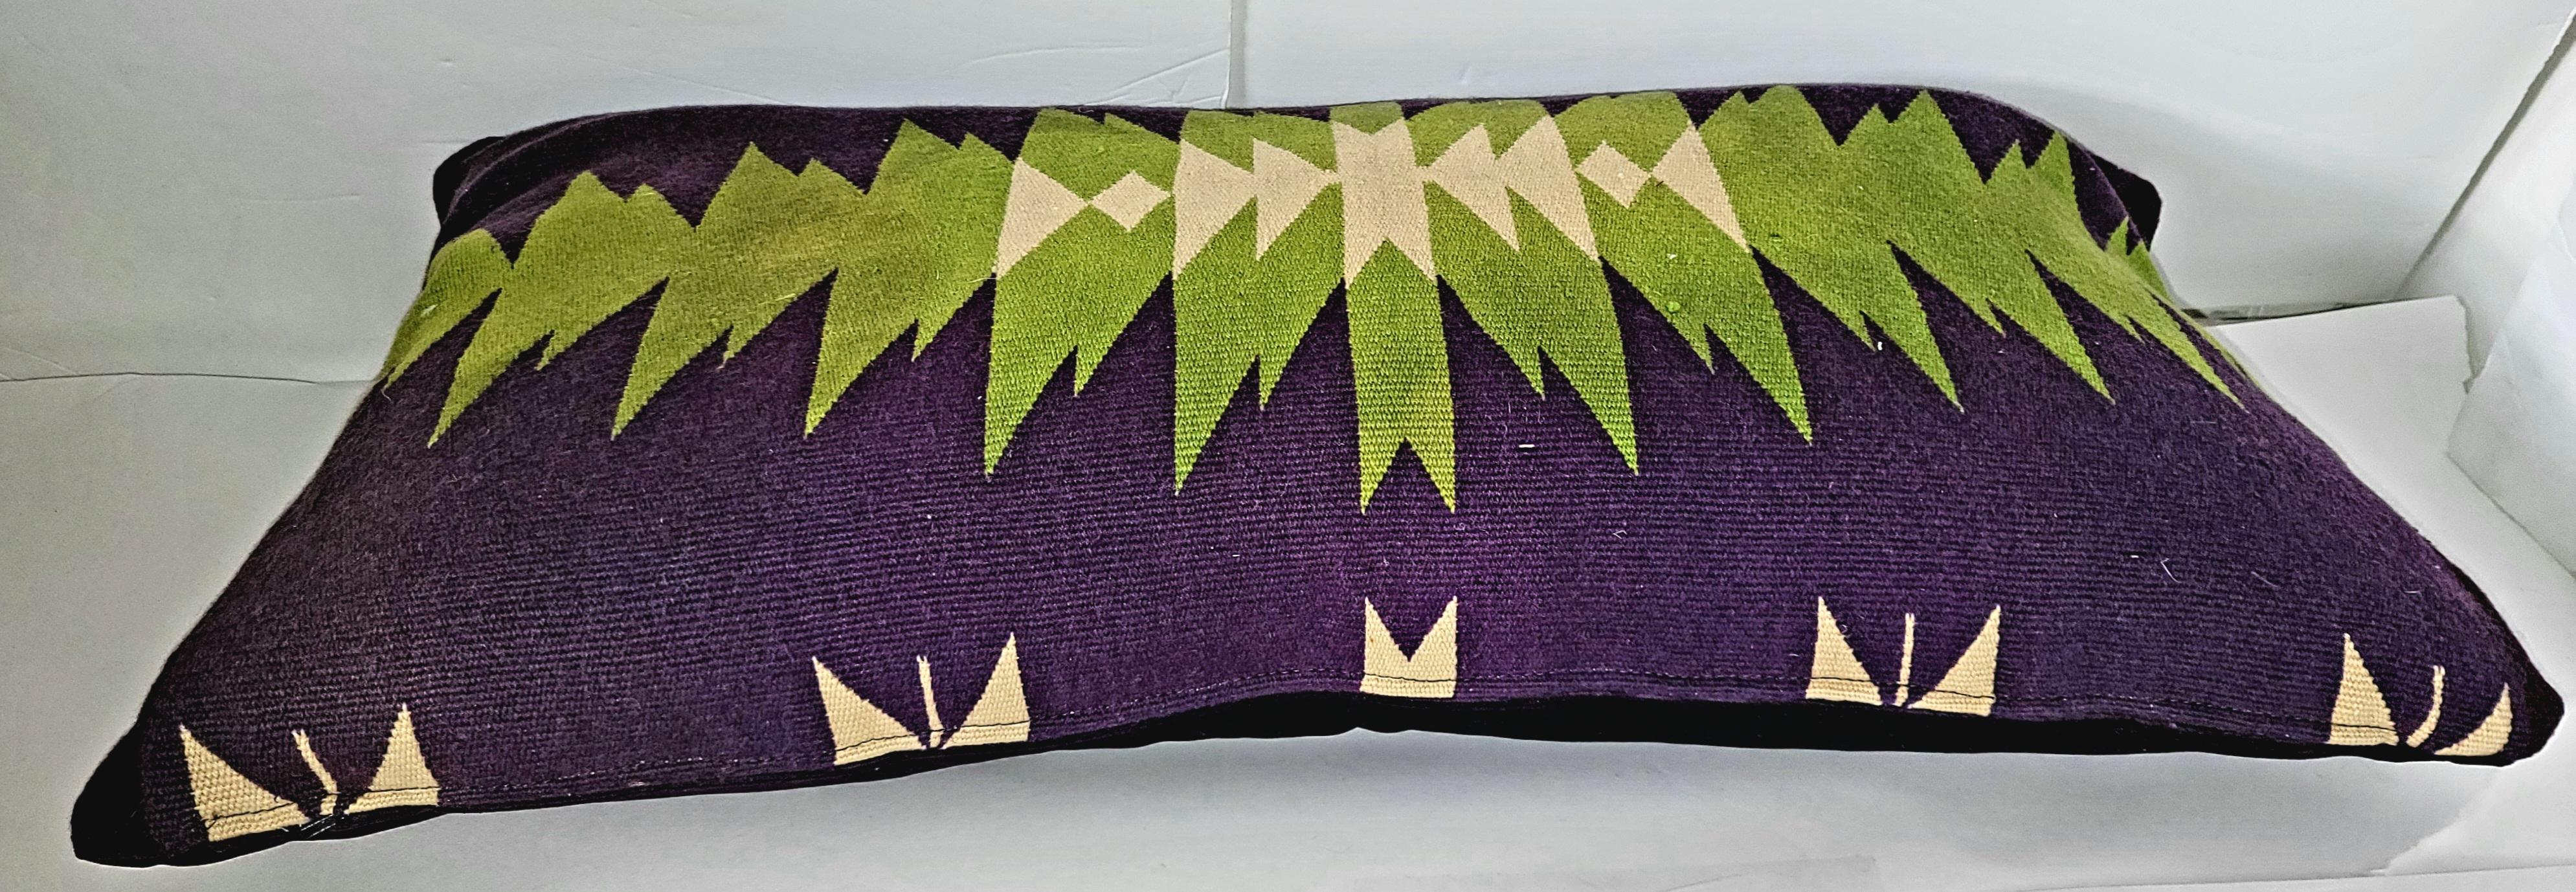 Early 20thc Navajo Indian weaving bolster pillow in purple & vibrant green wool and purple velvet backing. The insert is down & feather filled.